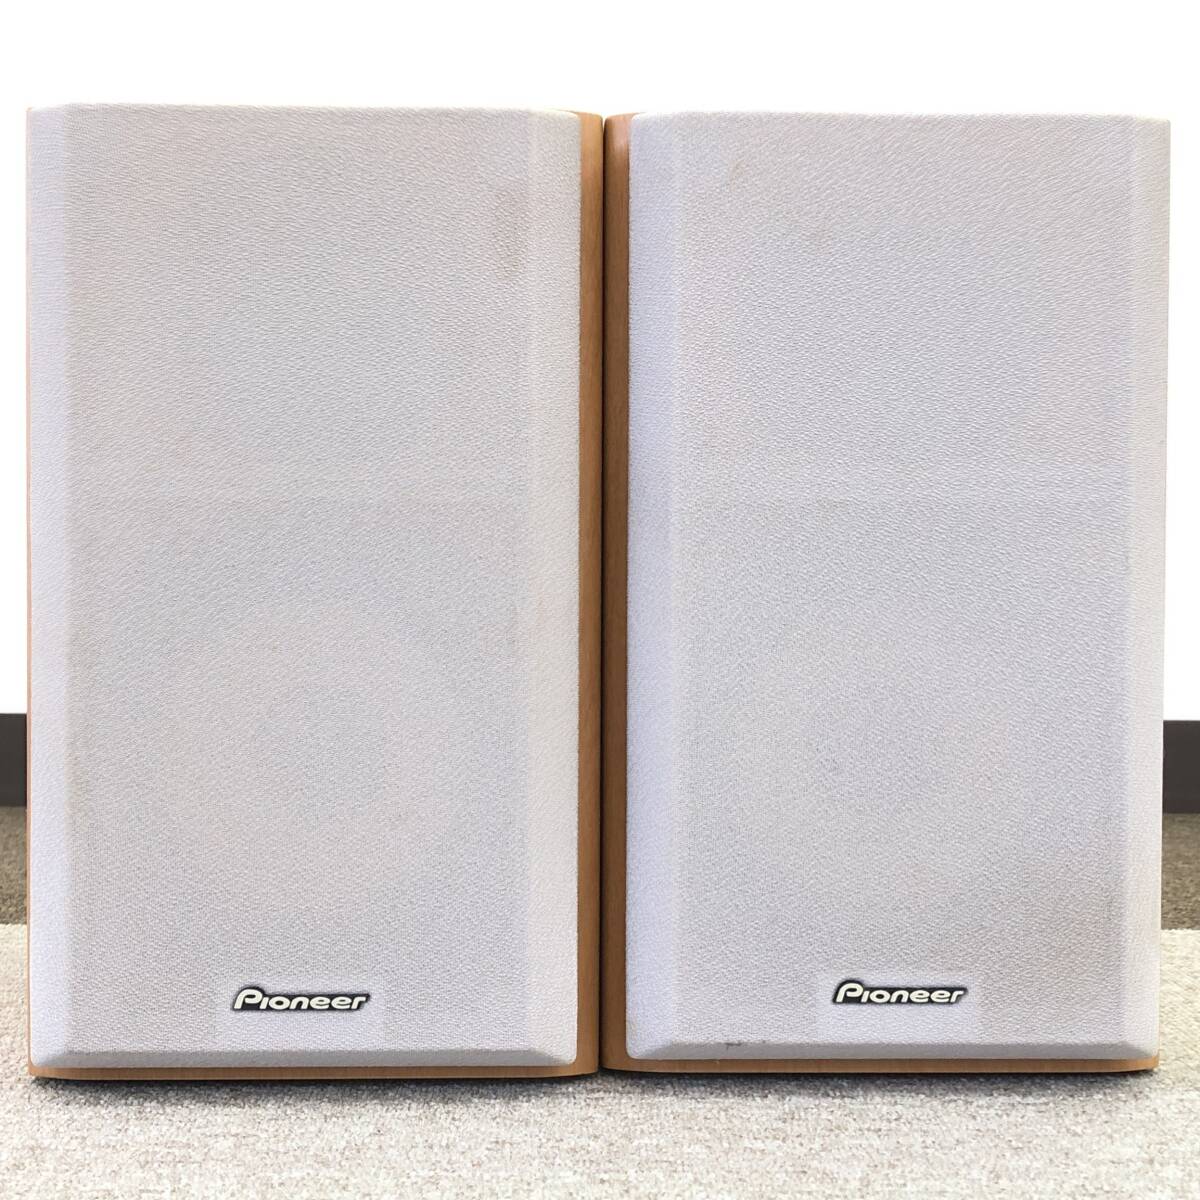 Pioneer Pioneer S-RS7-LR pair speaker sound out verification settled junk treatment present condition goods audio equipment sound equipment 